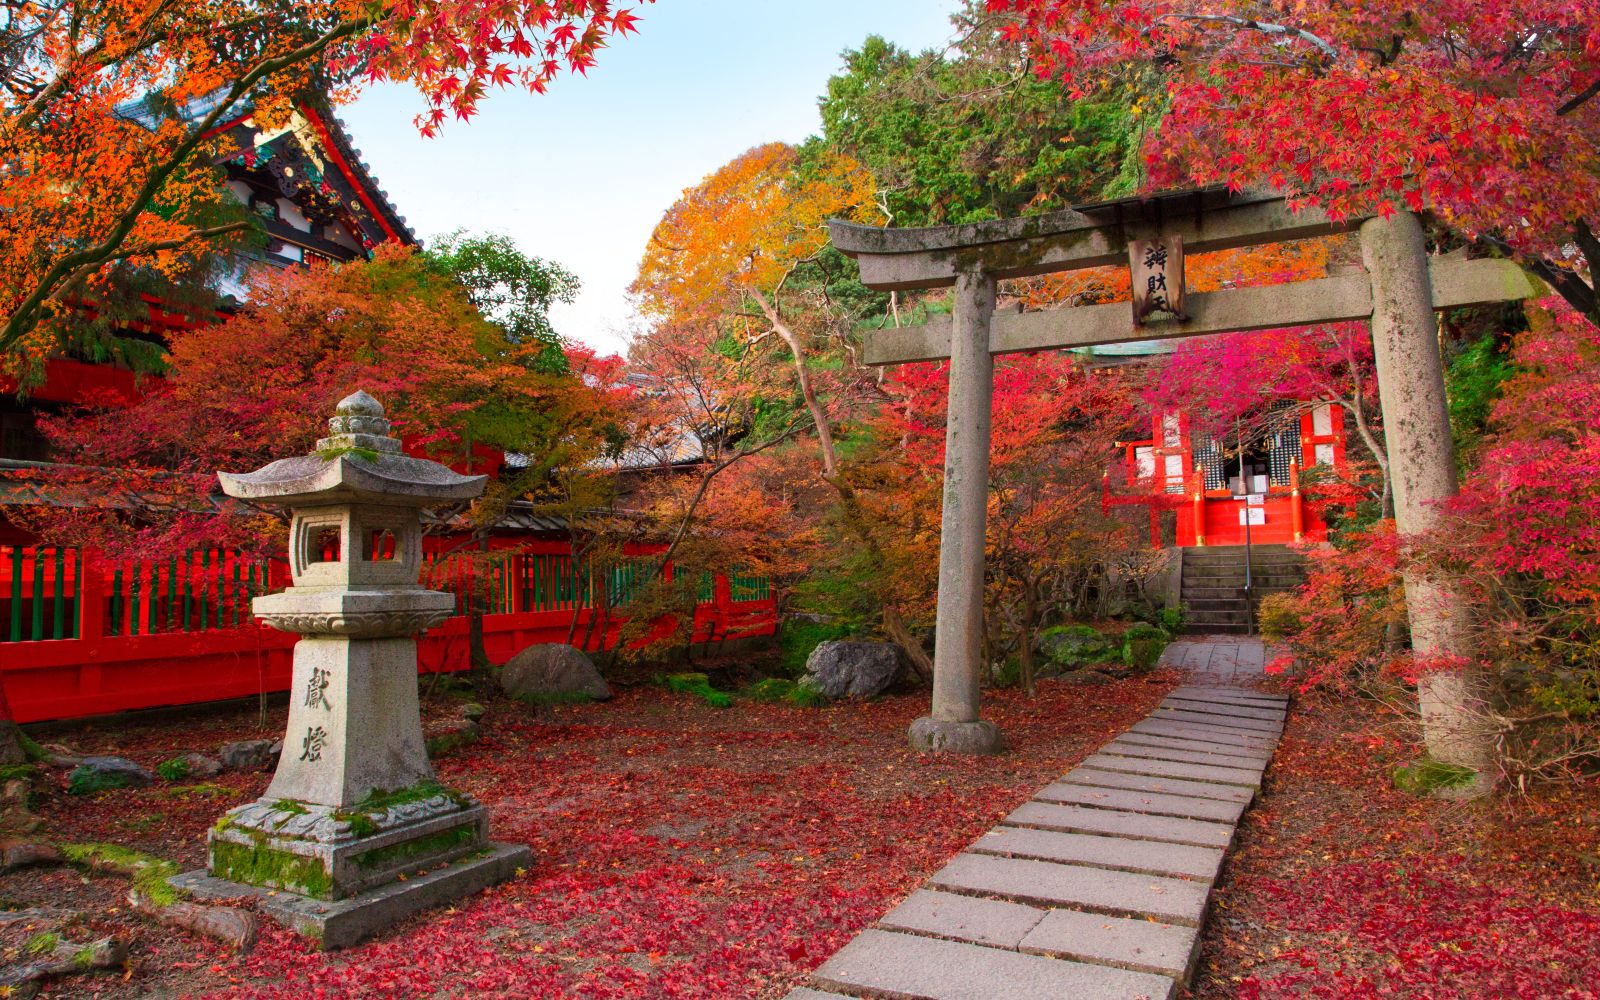 Gardens and a temple in the red autumn leaves in Kyoto Japan